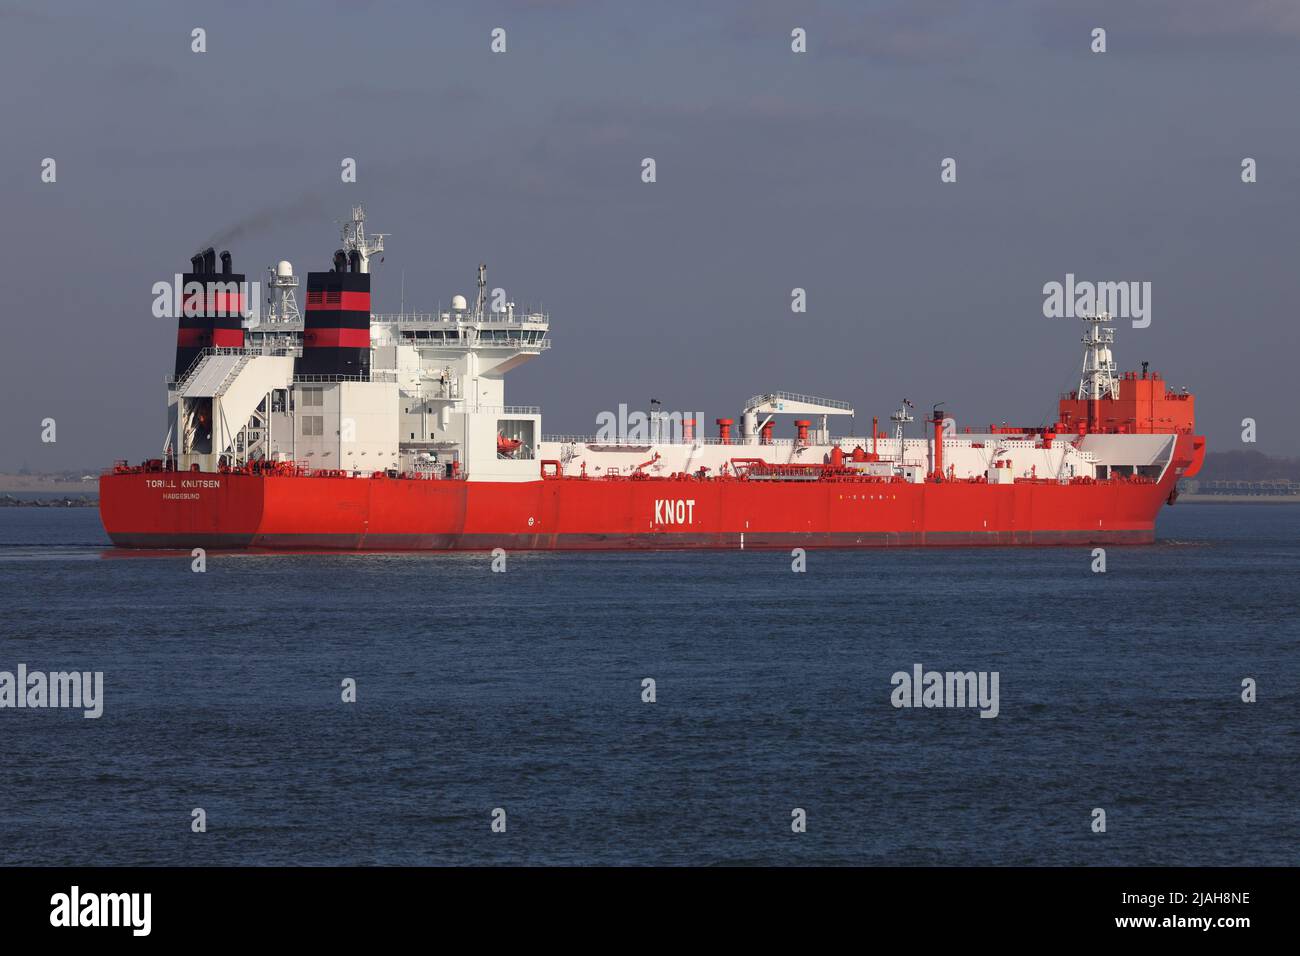 The shuttle tanker Torill Knutsen arrives in the port of Rotterdam on March 18, 2022. Stock Photo